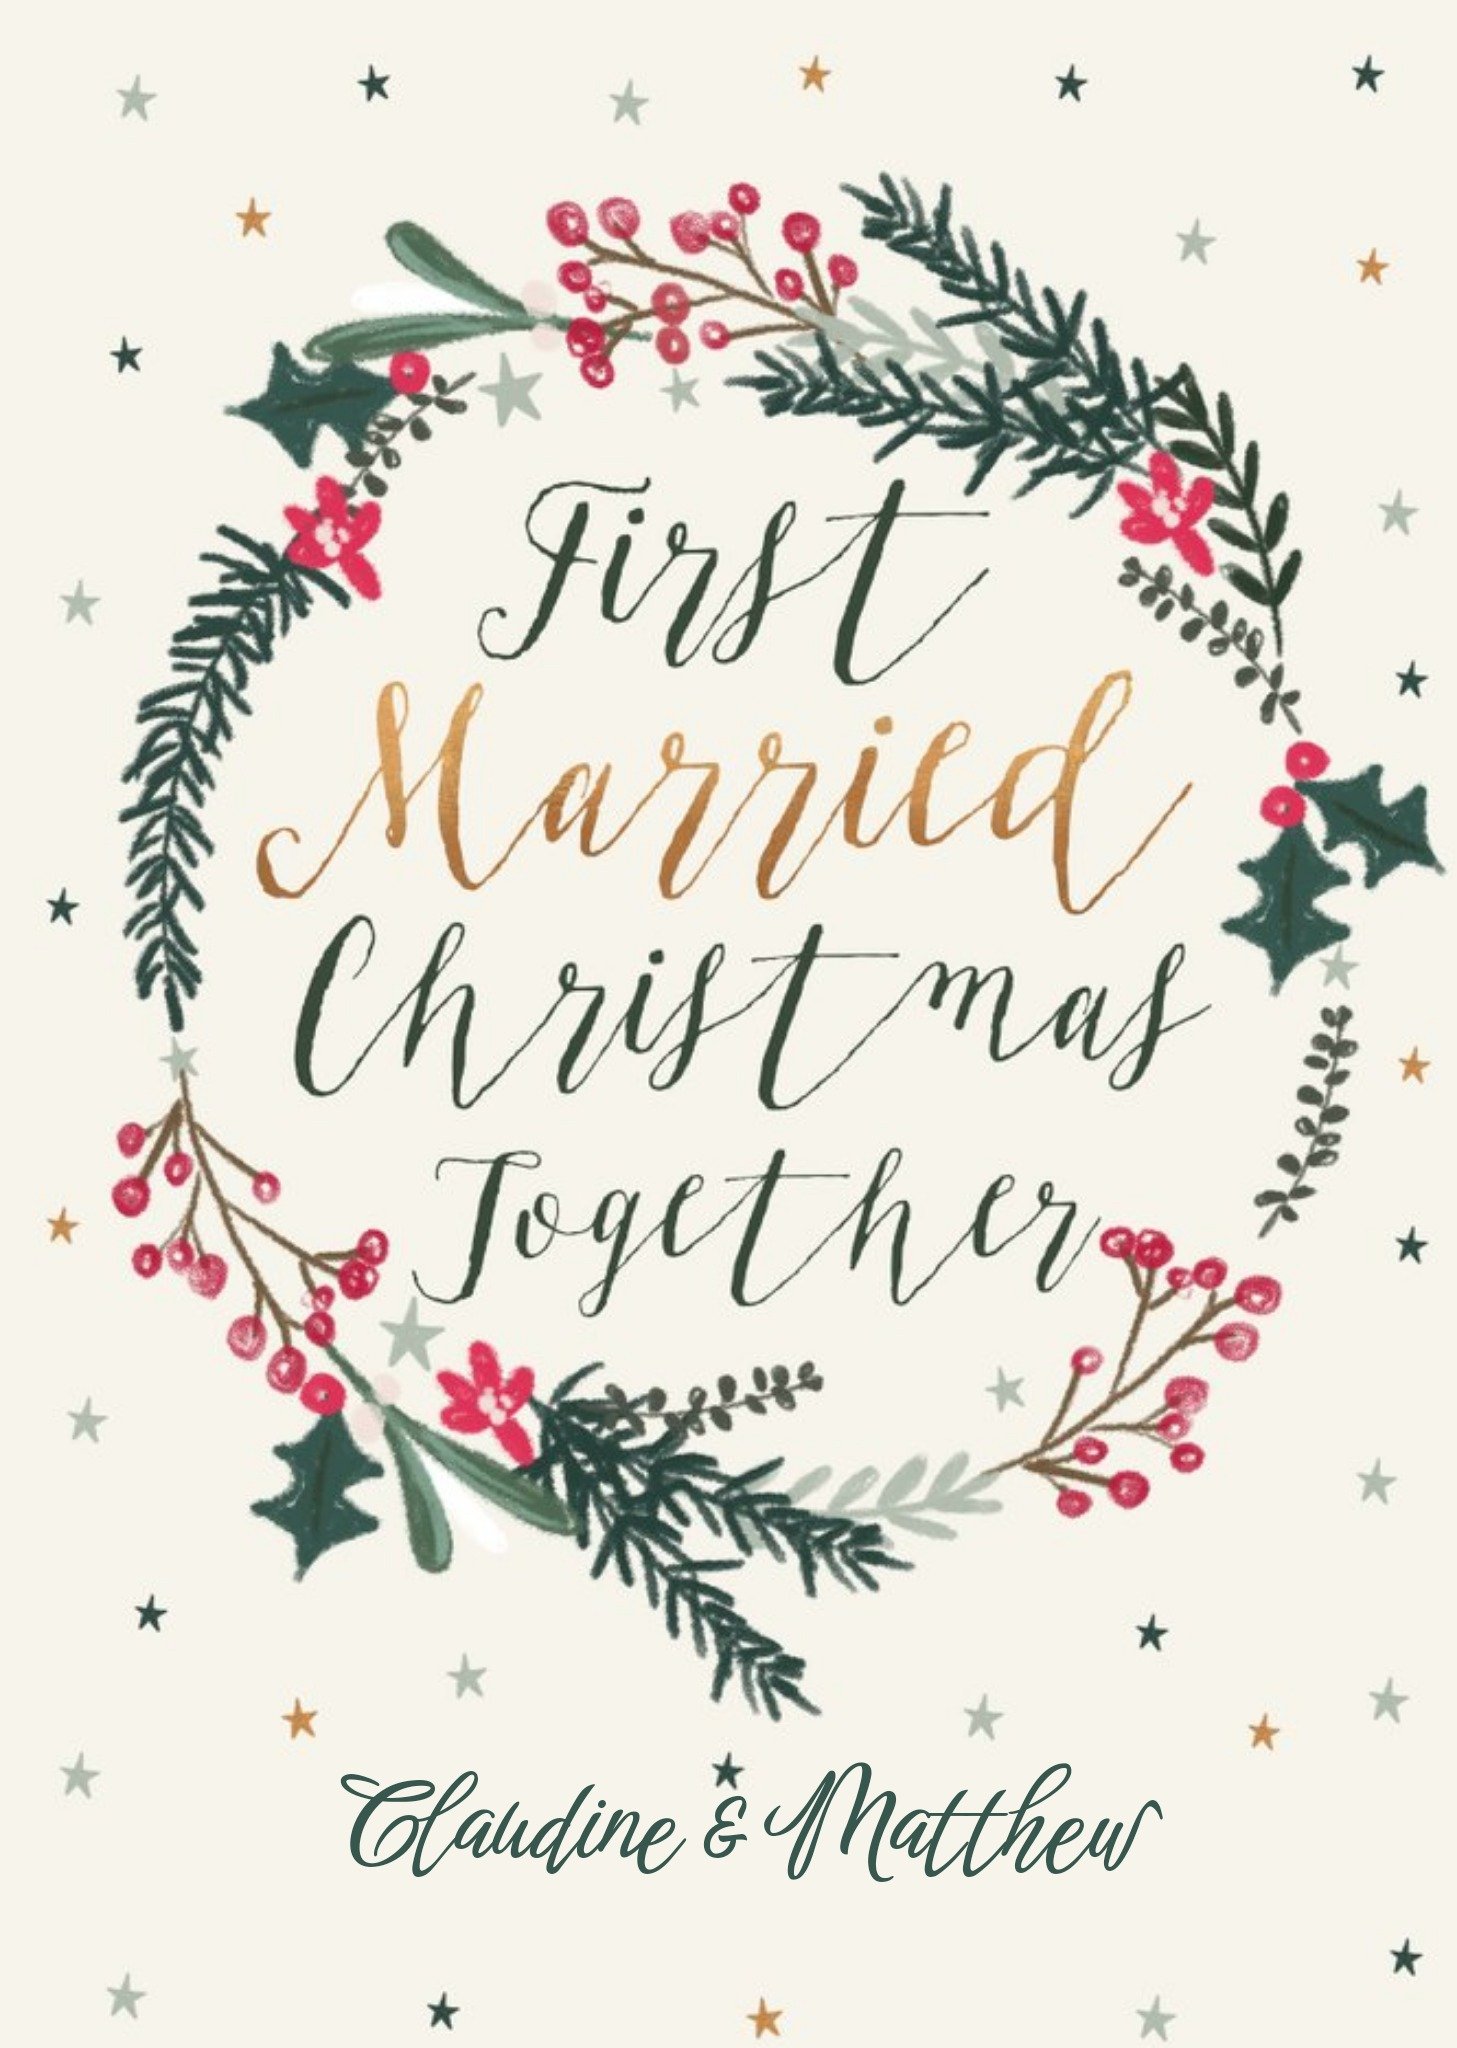 Moonpig First Married Christmas Together Cute Christmas Card Ecard